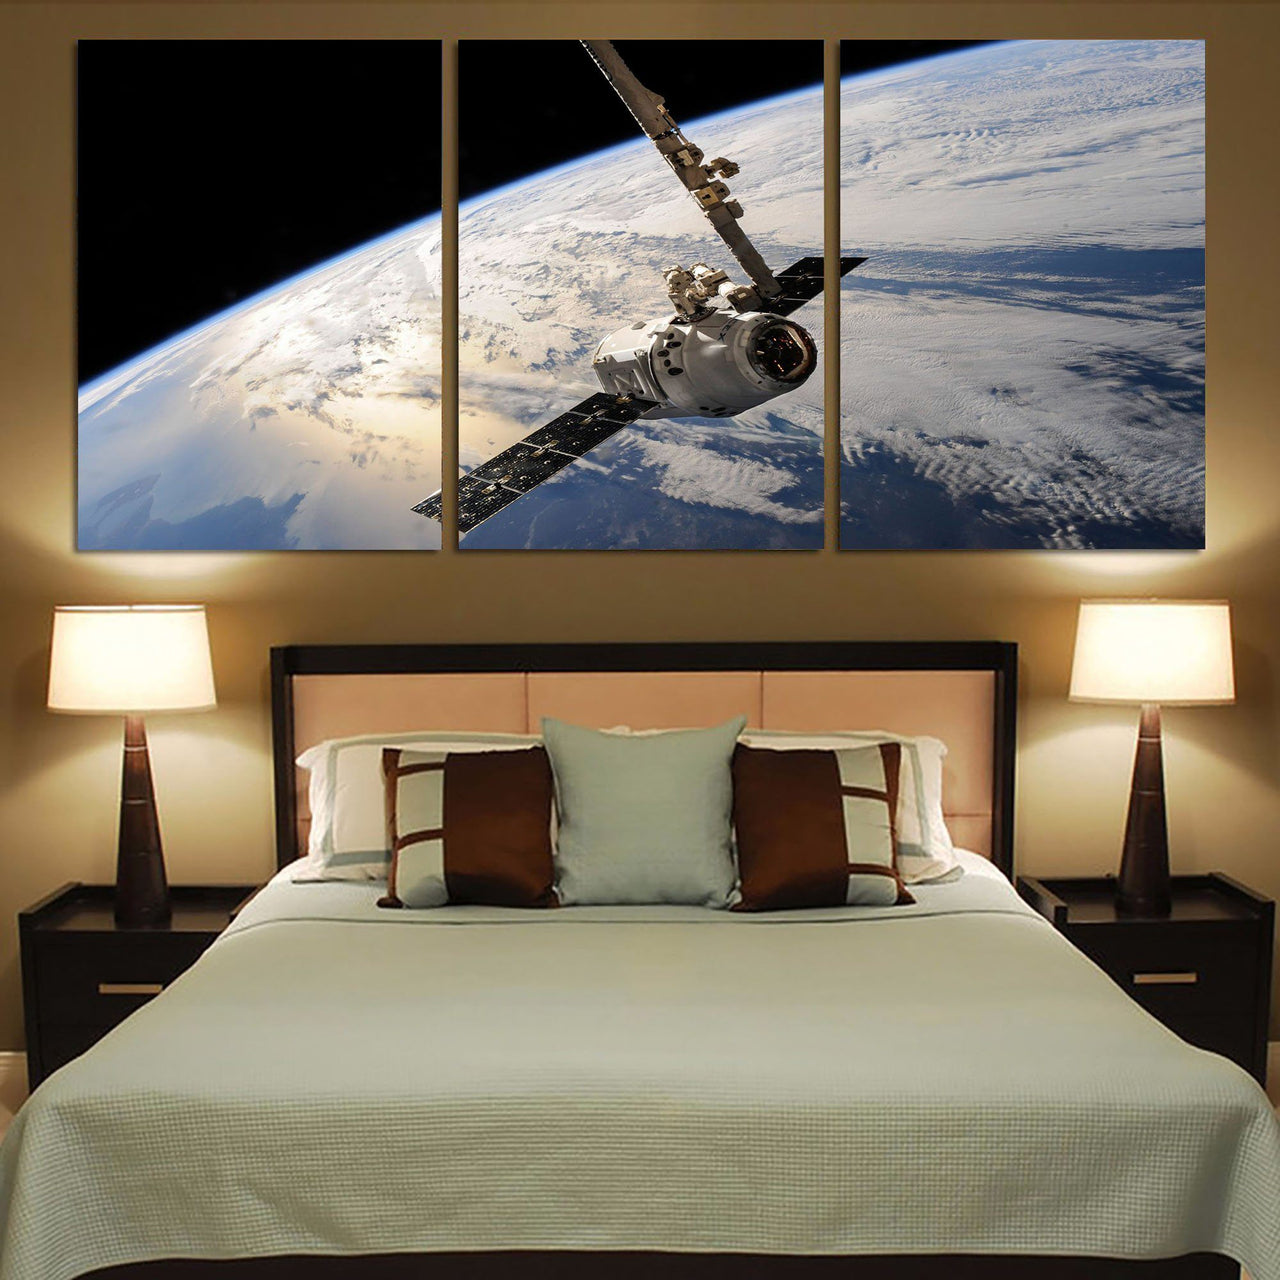 World View from Space Printed Canvas Posters (3 Pieces) Aviation Shop 